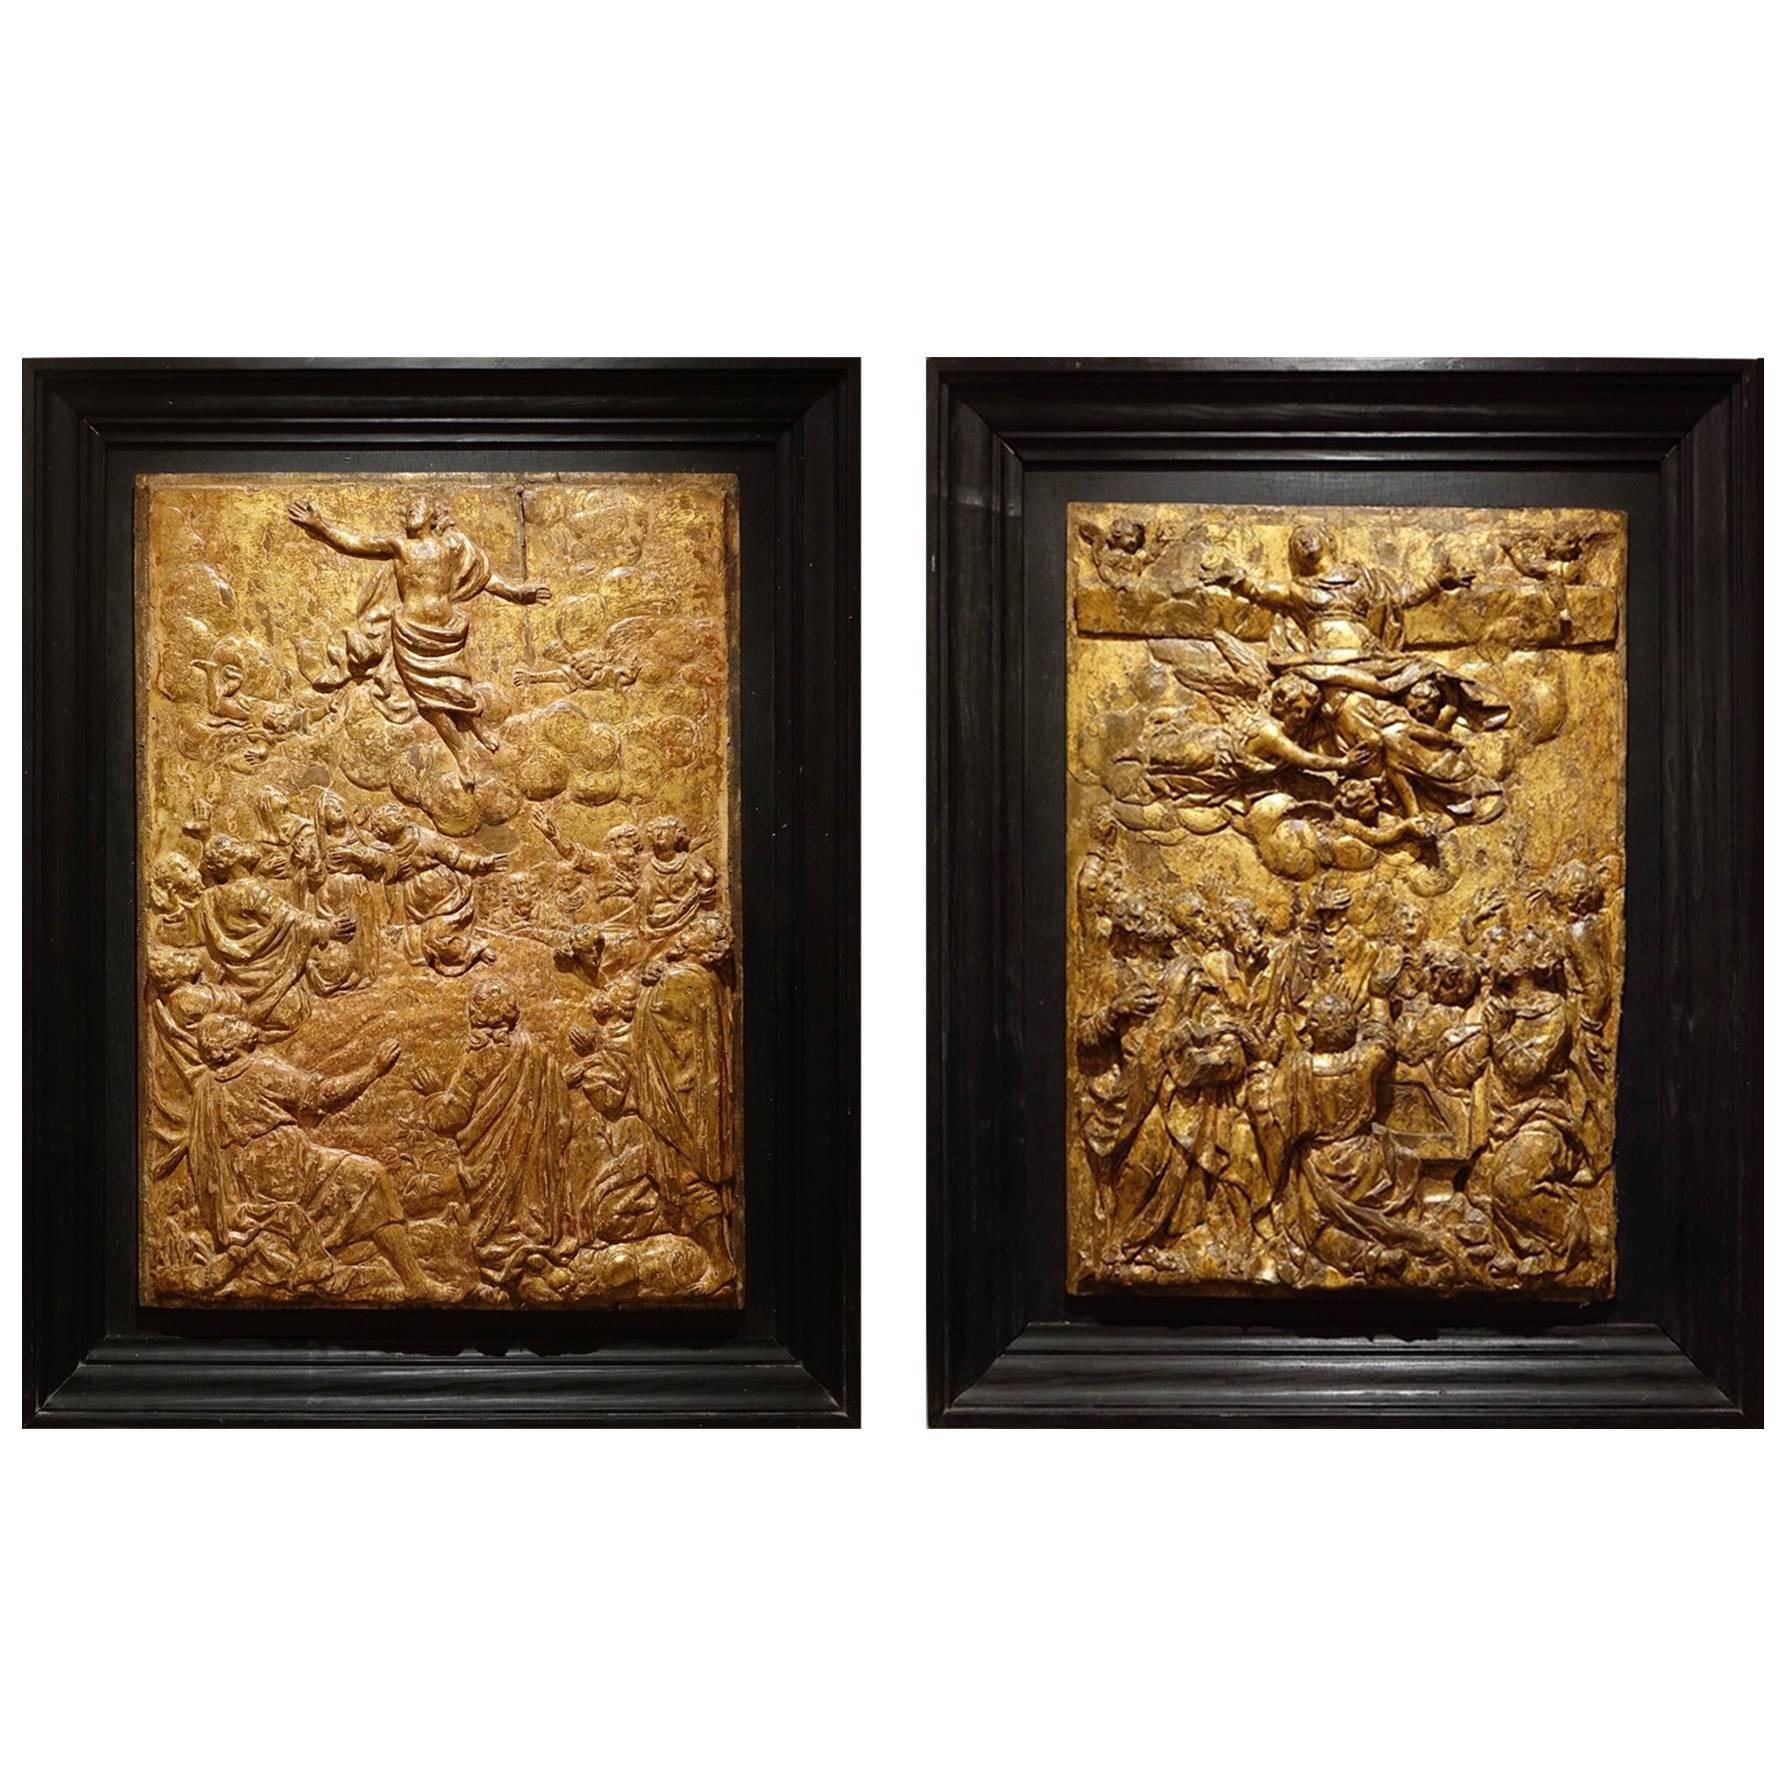 Pair of Carved Oak Gilt Panels, Flanders Late 16th Century